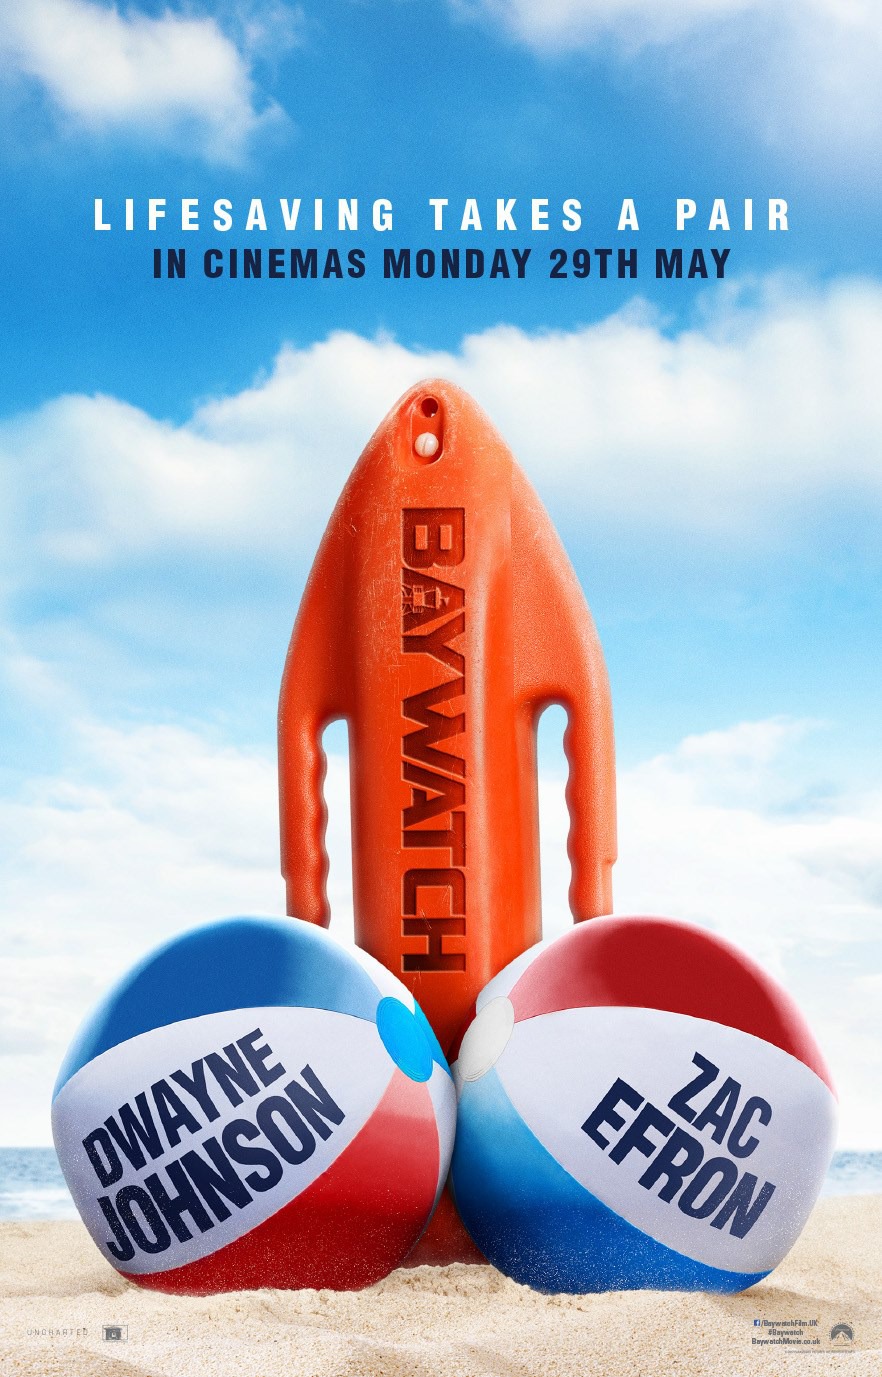 BAYWATCH (2017) - Trailers, Clips, Featurettes, Images and Posters ...